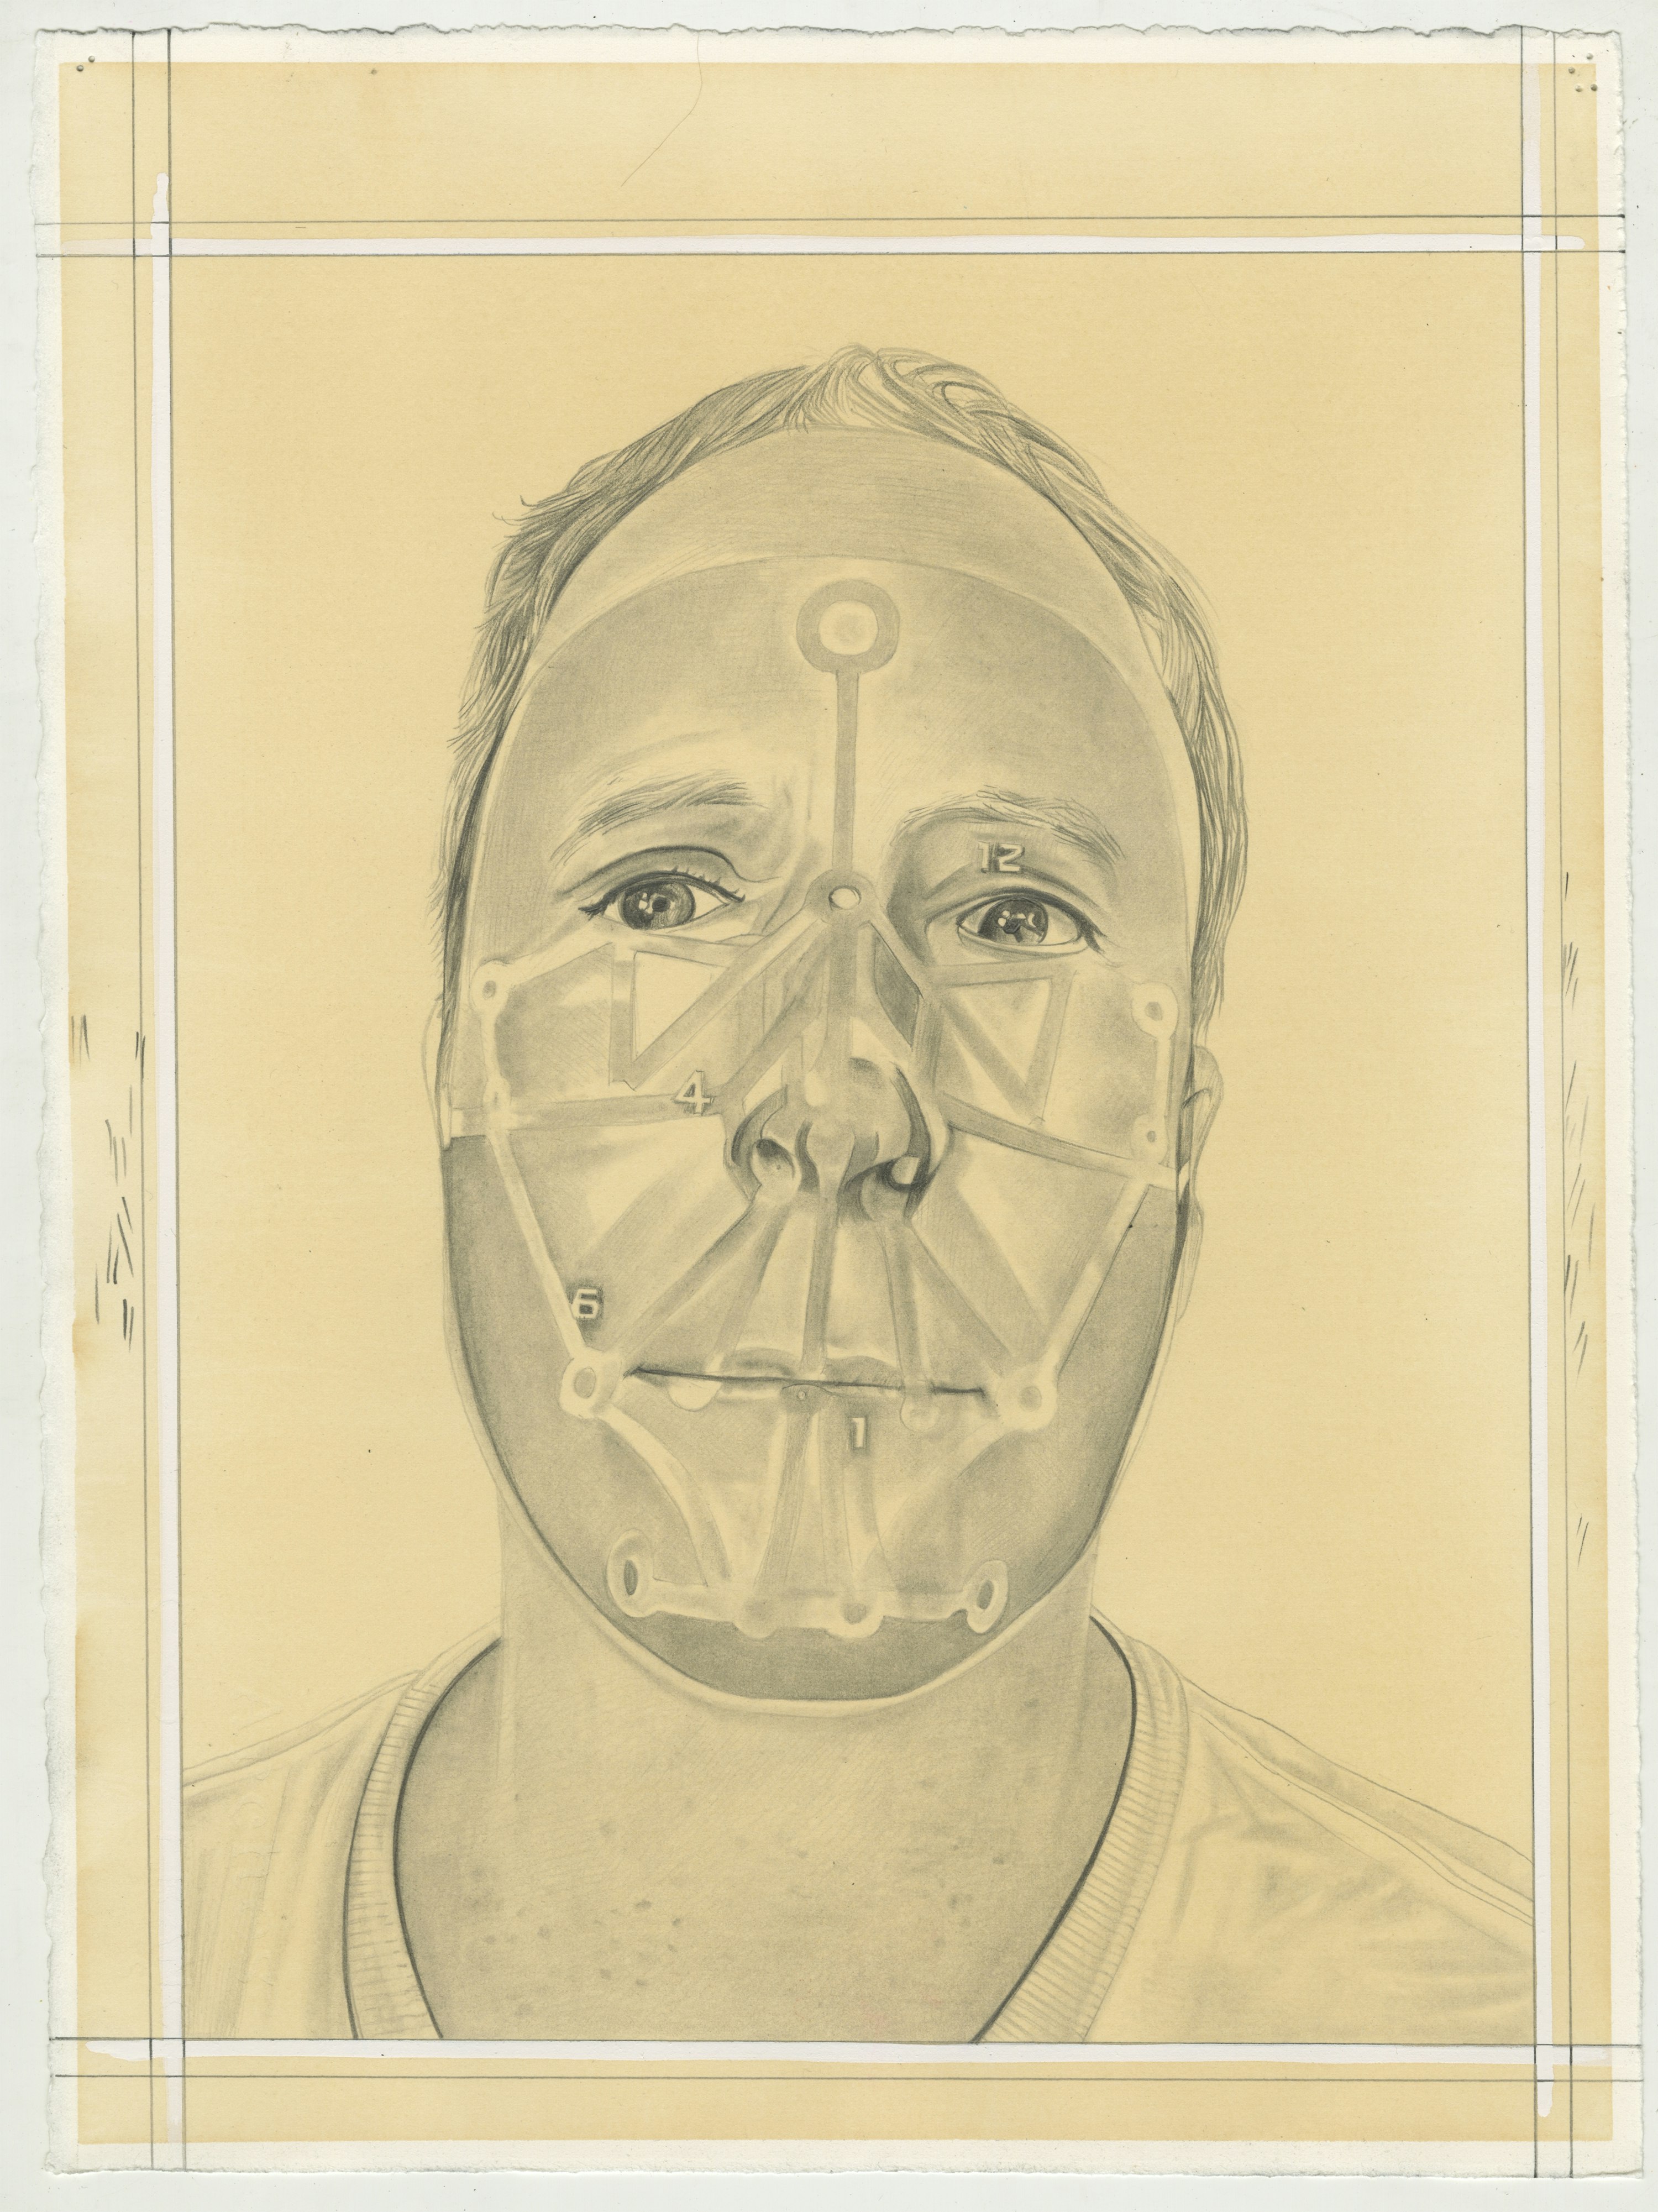 Portrait of Tony Oursler, pencil on paper by Phong H. Bui.